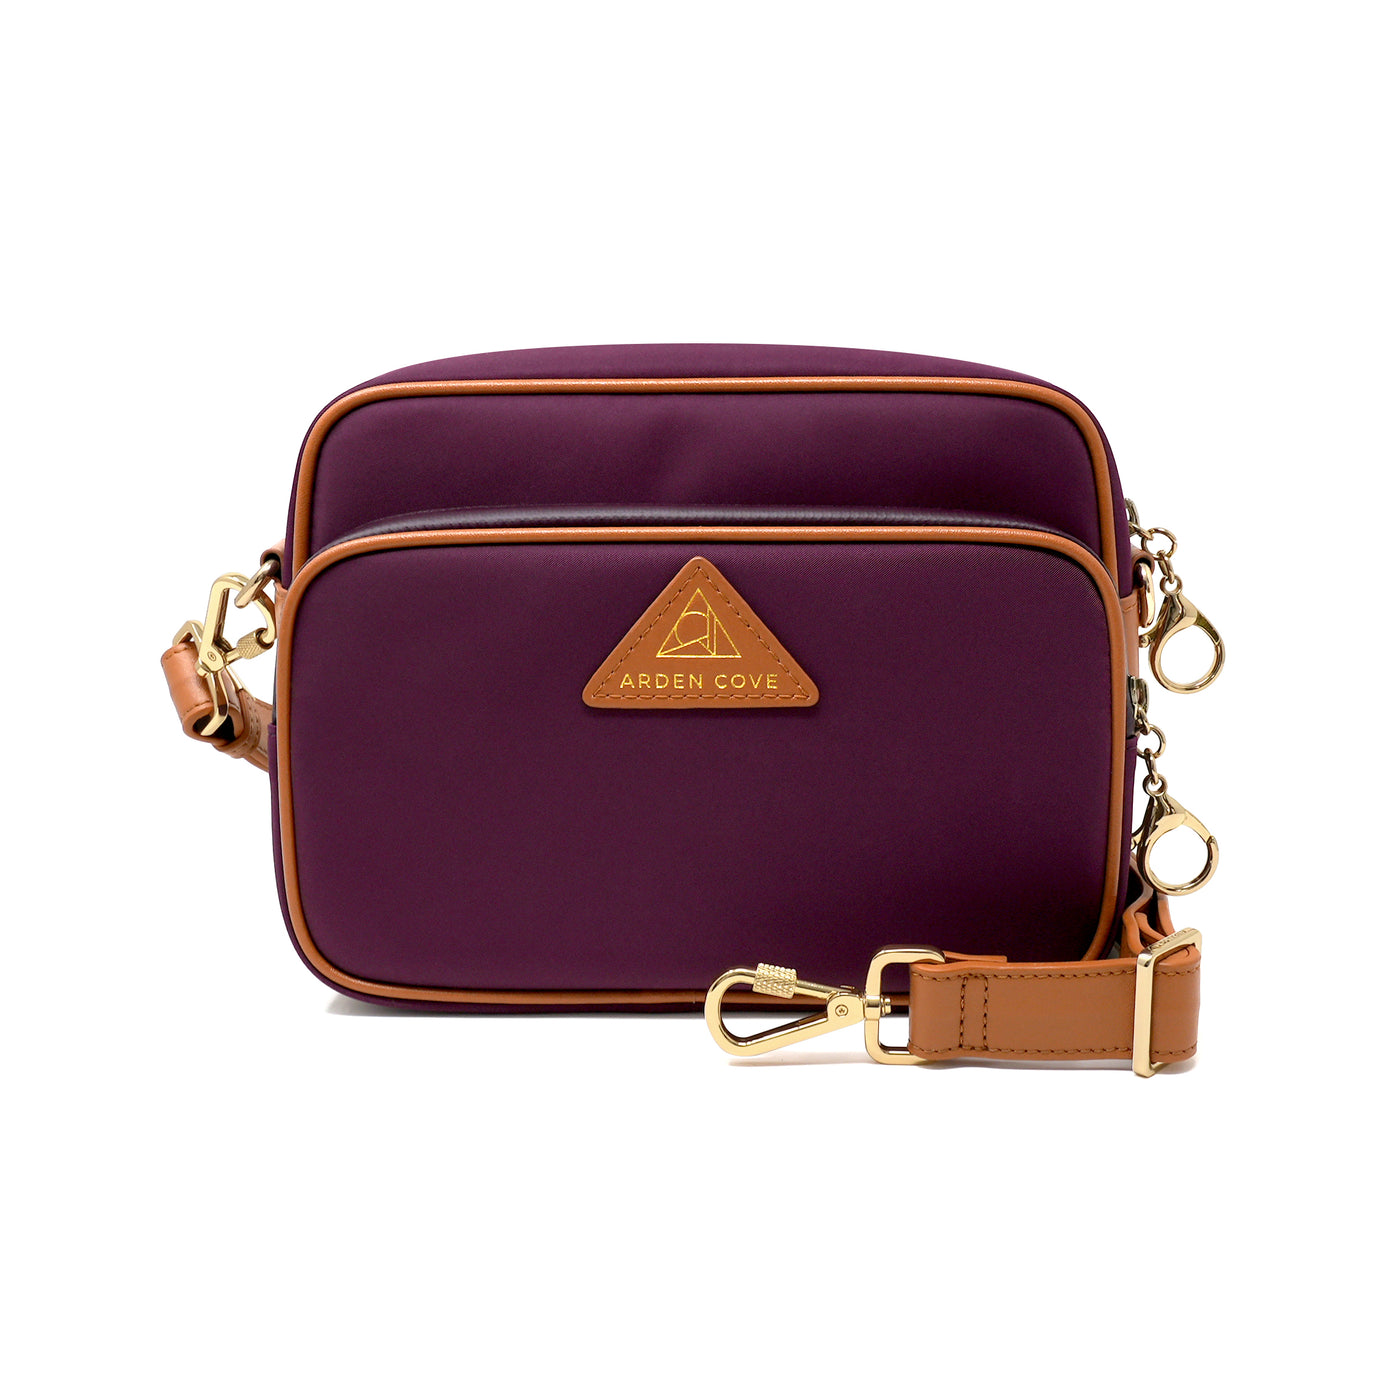 Anti-theft Water-resistant Travel Crossbody - Crissy Full Crossbody in Maroon Gold with slash-resistant wide faux leather & locking clasps straps - front view - Arden Cove